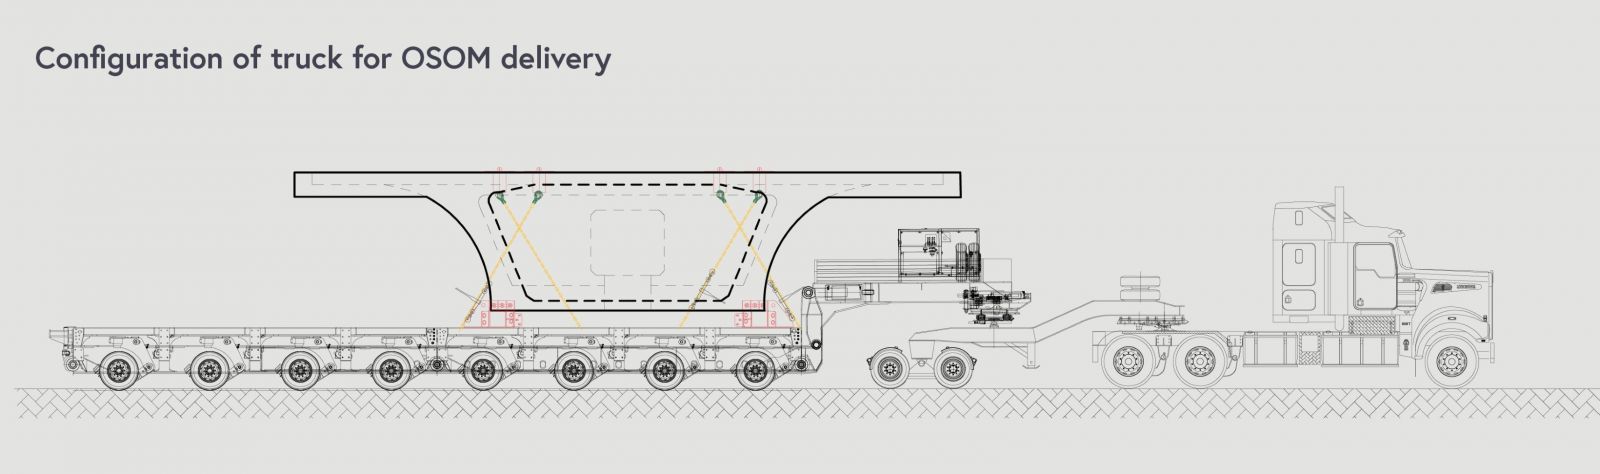 An infographic showing the configuration of a truck carrying an oversized, overmass (OSOM) load. In this infographic, a massive concrete segment is placed on the flatbed of a heavy haulage trailer.